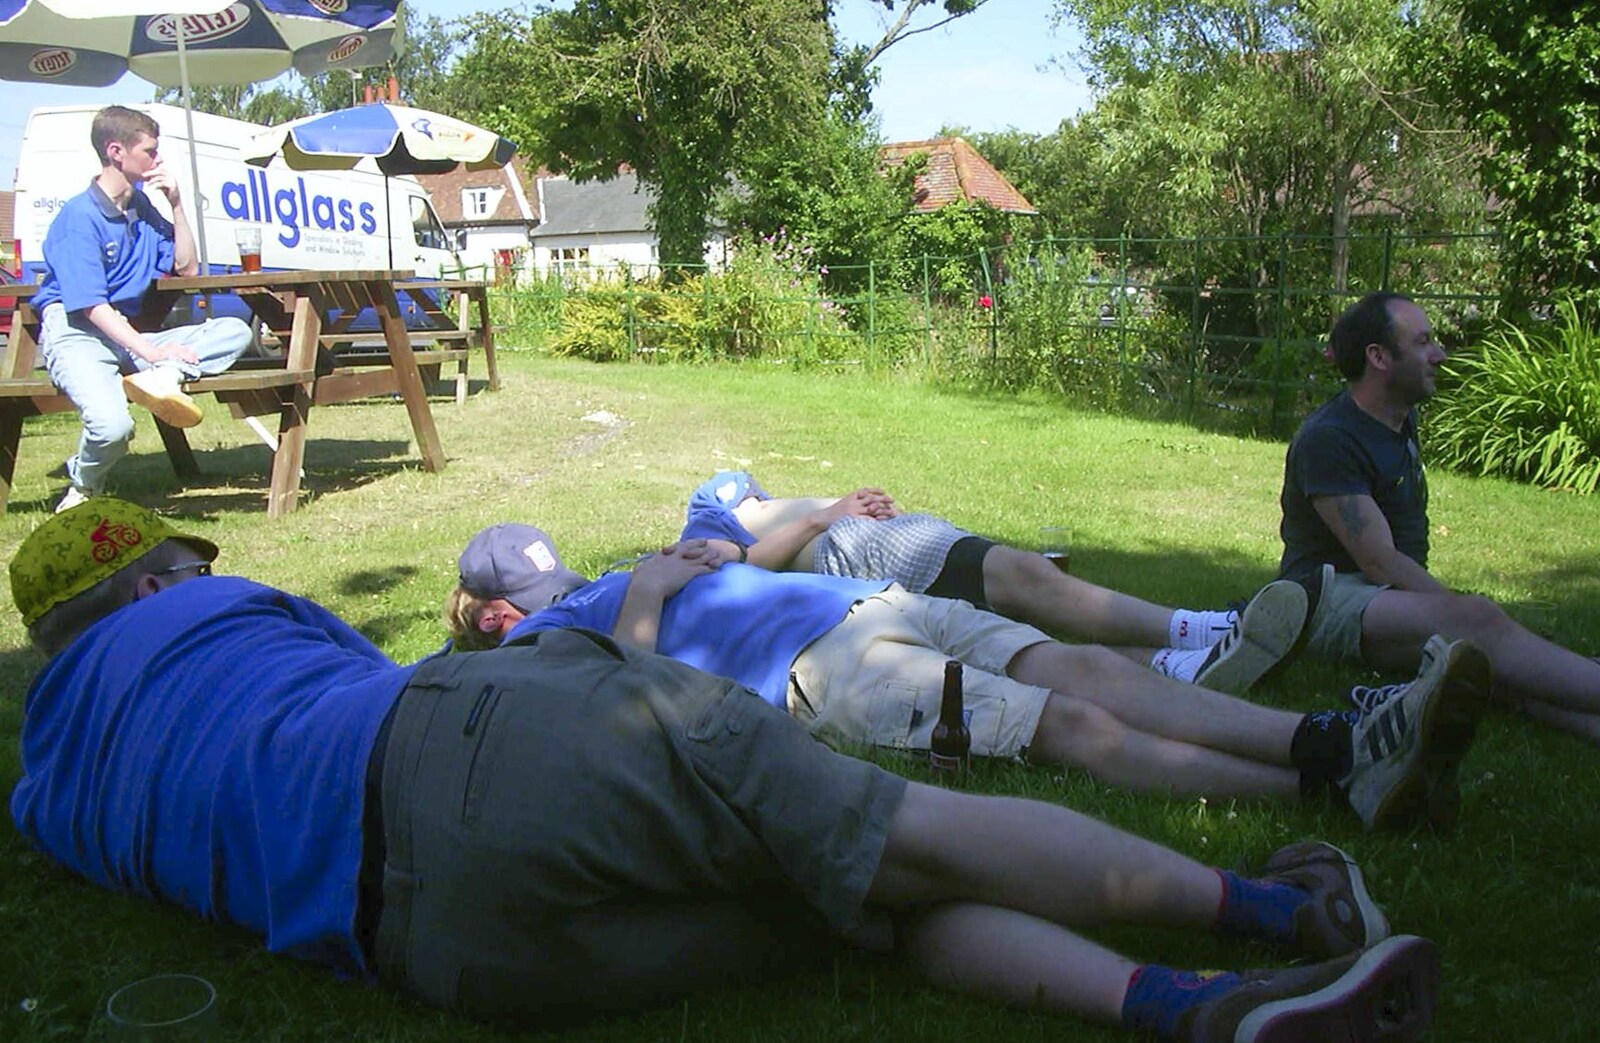 The BSCC Annual Bike Ride, Orford, Suffolk - 12th July 2003: More sleeping in another beer garden